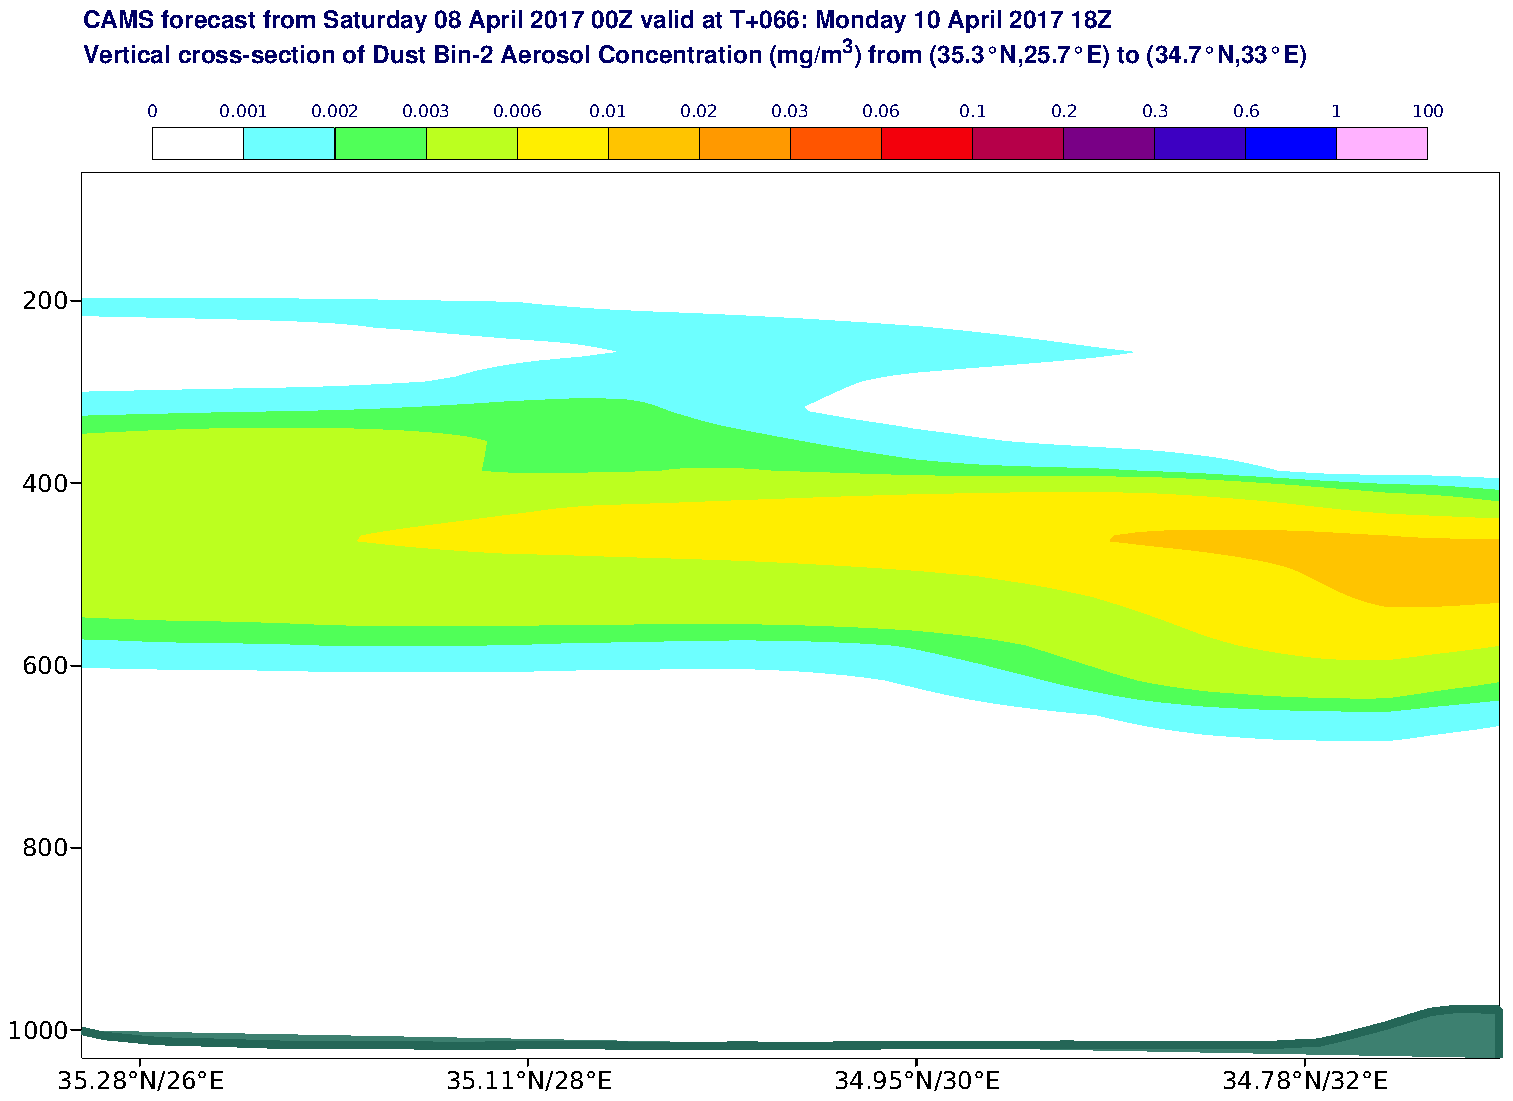 Vertical cross-section of Dust Bin-2 Aerosol Concentration (mg/m3) valid at T66 - 2017-04-10 18:00